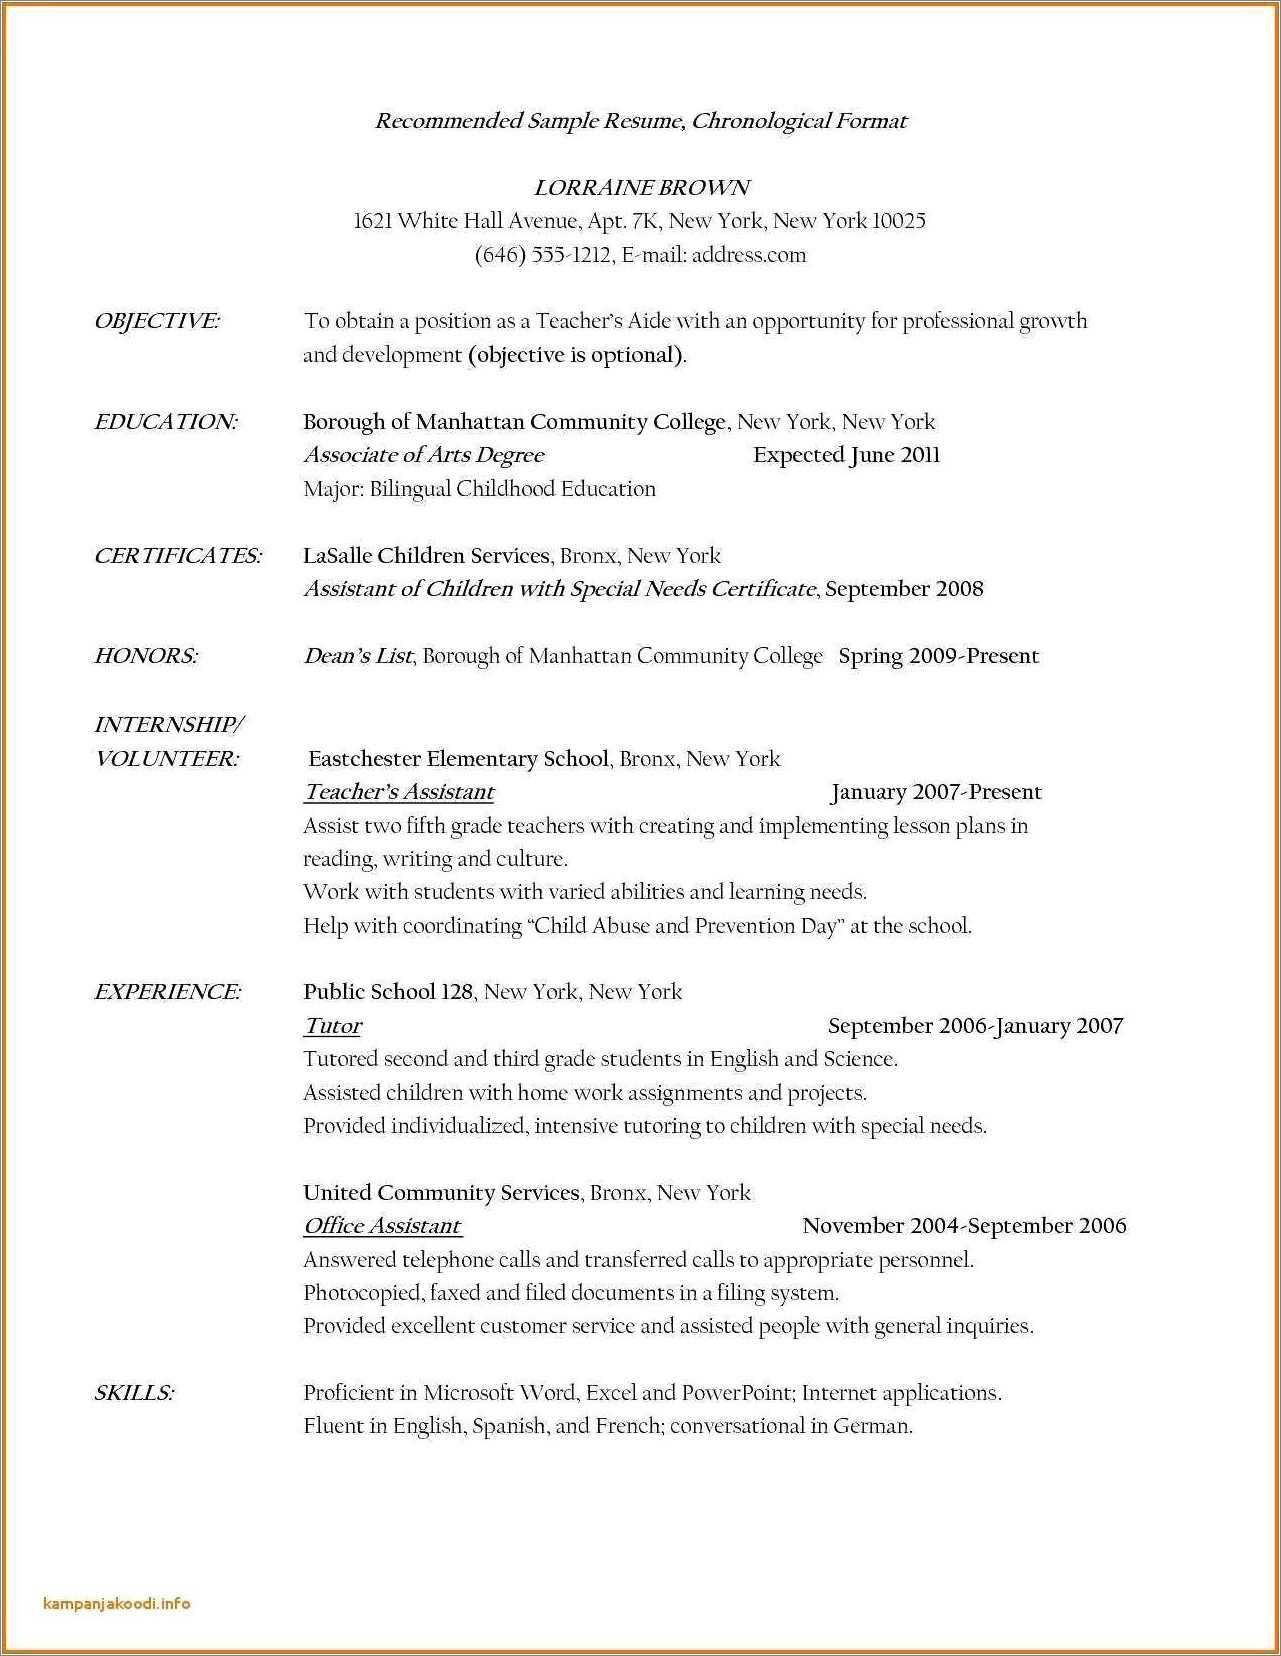 Massage Therapy Teacher Resume Examples - Resume Example Gallery